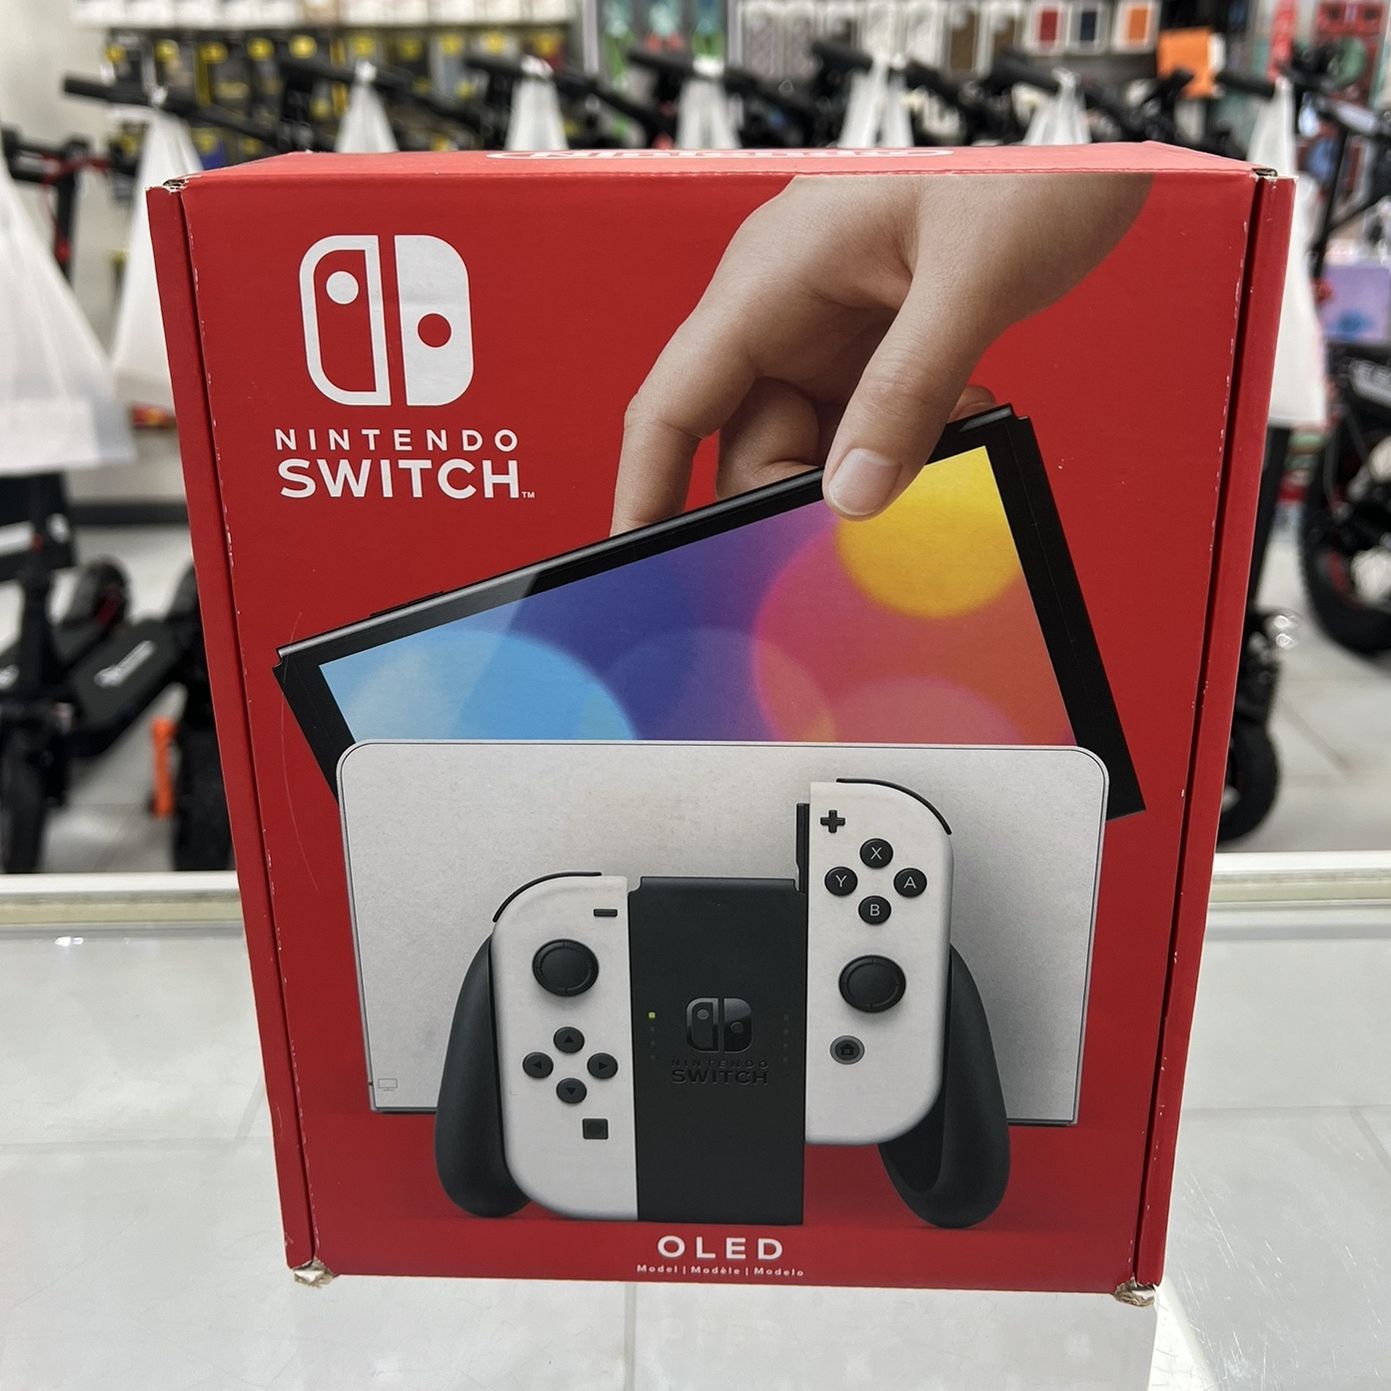 Nintendo Switch OLED All White! Finance For $50 Down Payment!!